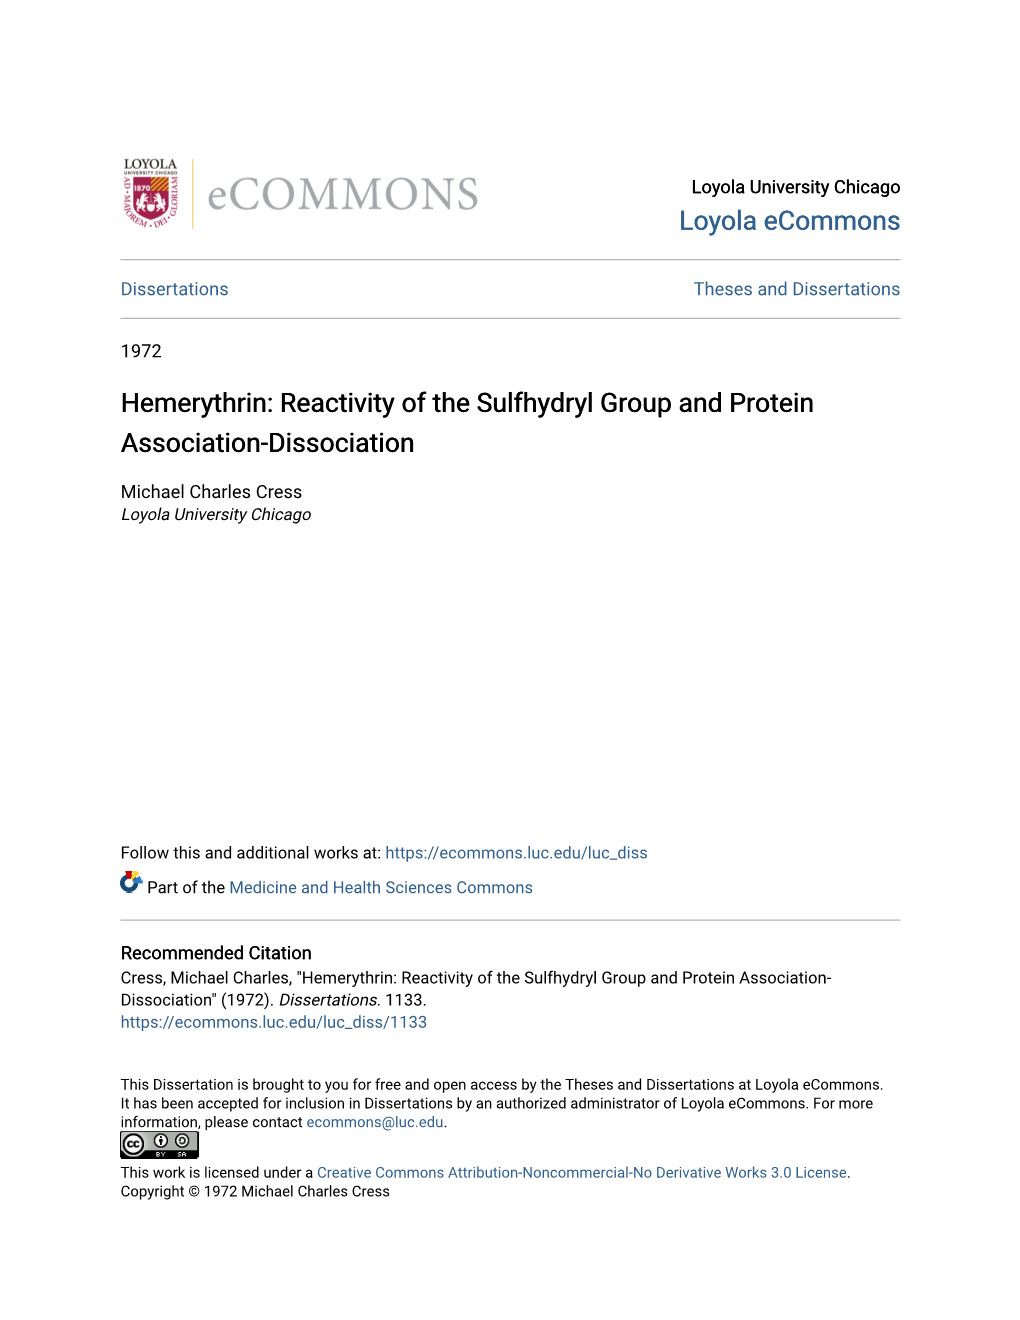 Hemerythrin: Reactivity of the Sulfhydryl Group and Protein Association-Dissociation